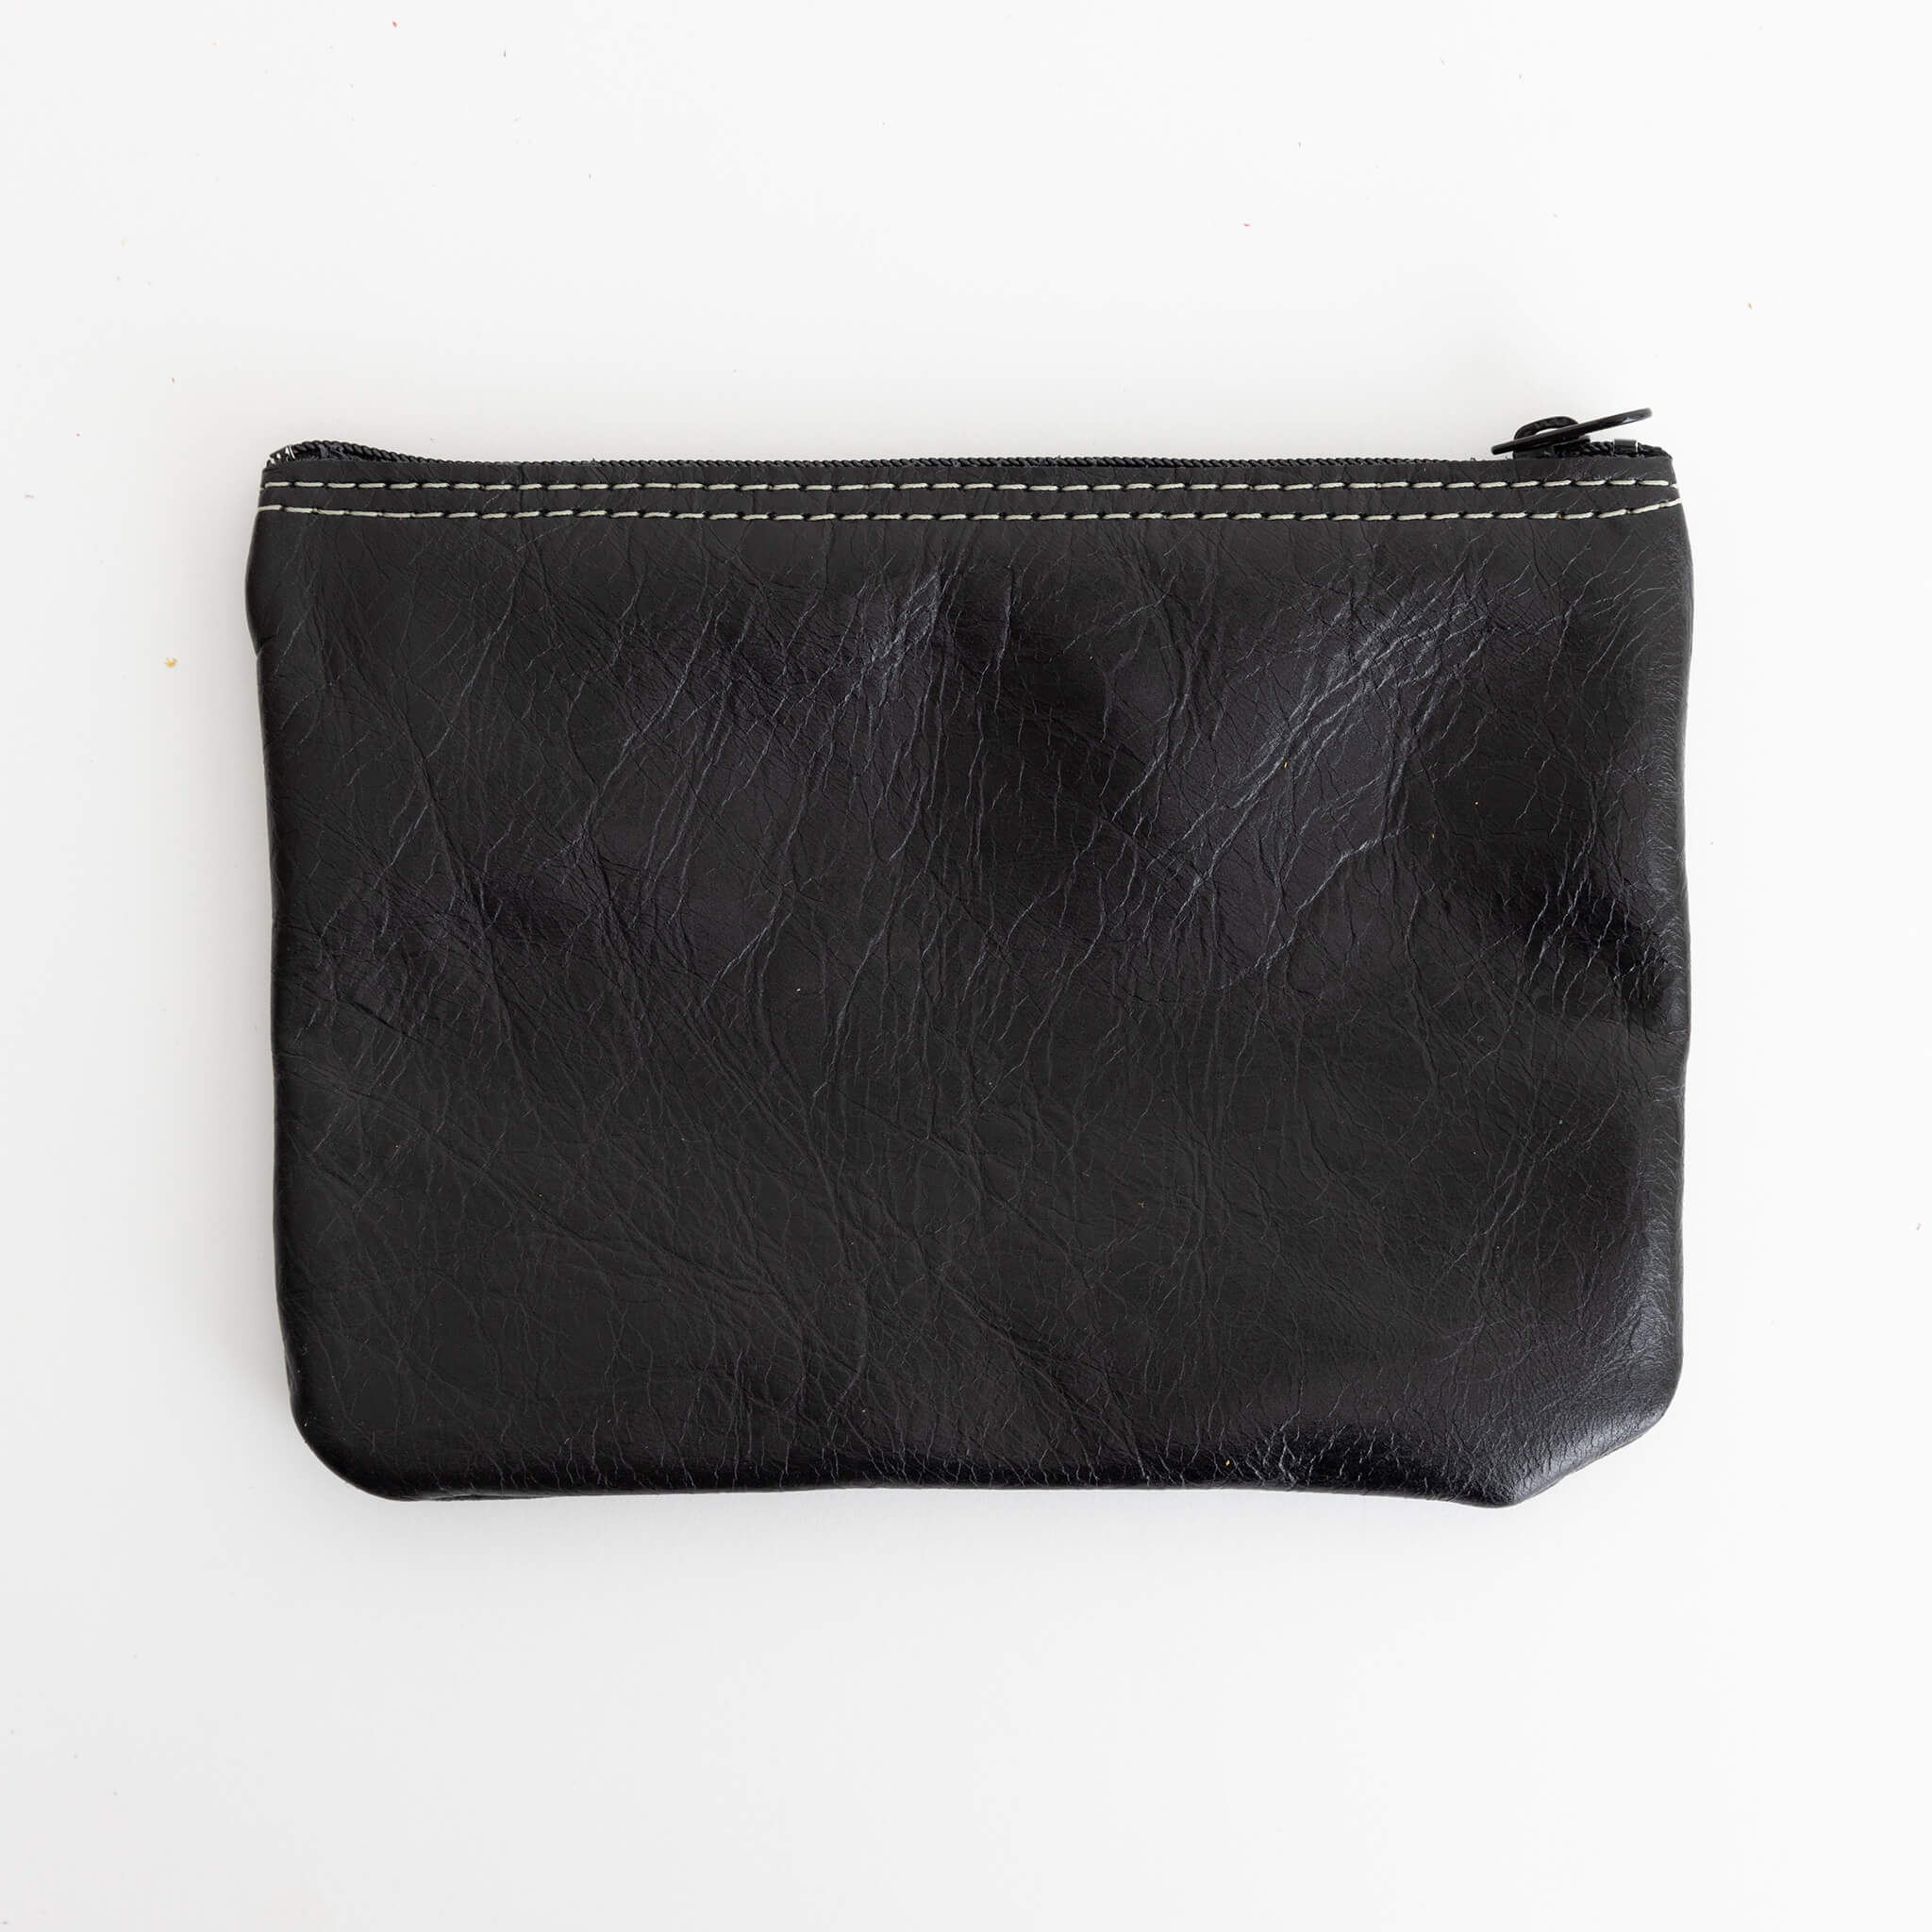 perfect pouch unisex zipper bag - handmade leather - black front view